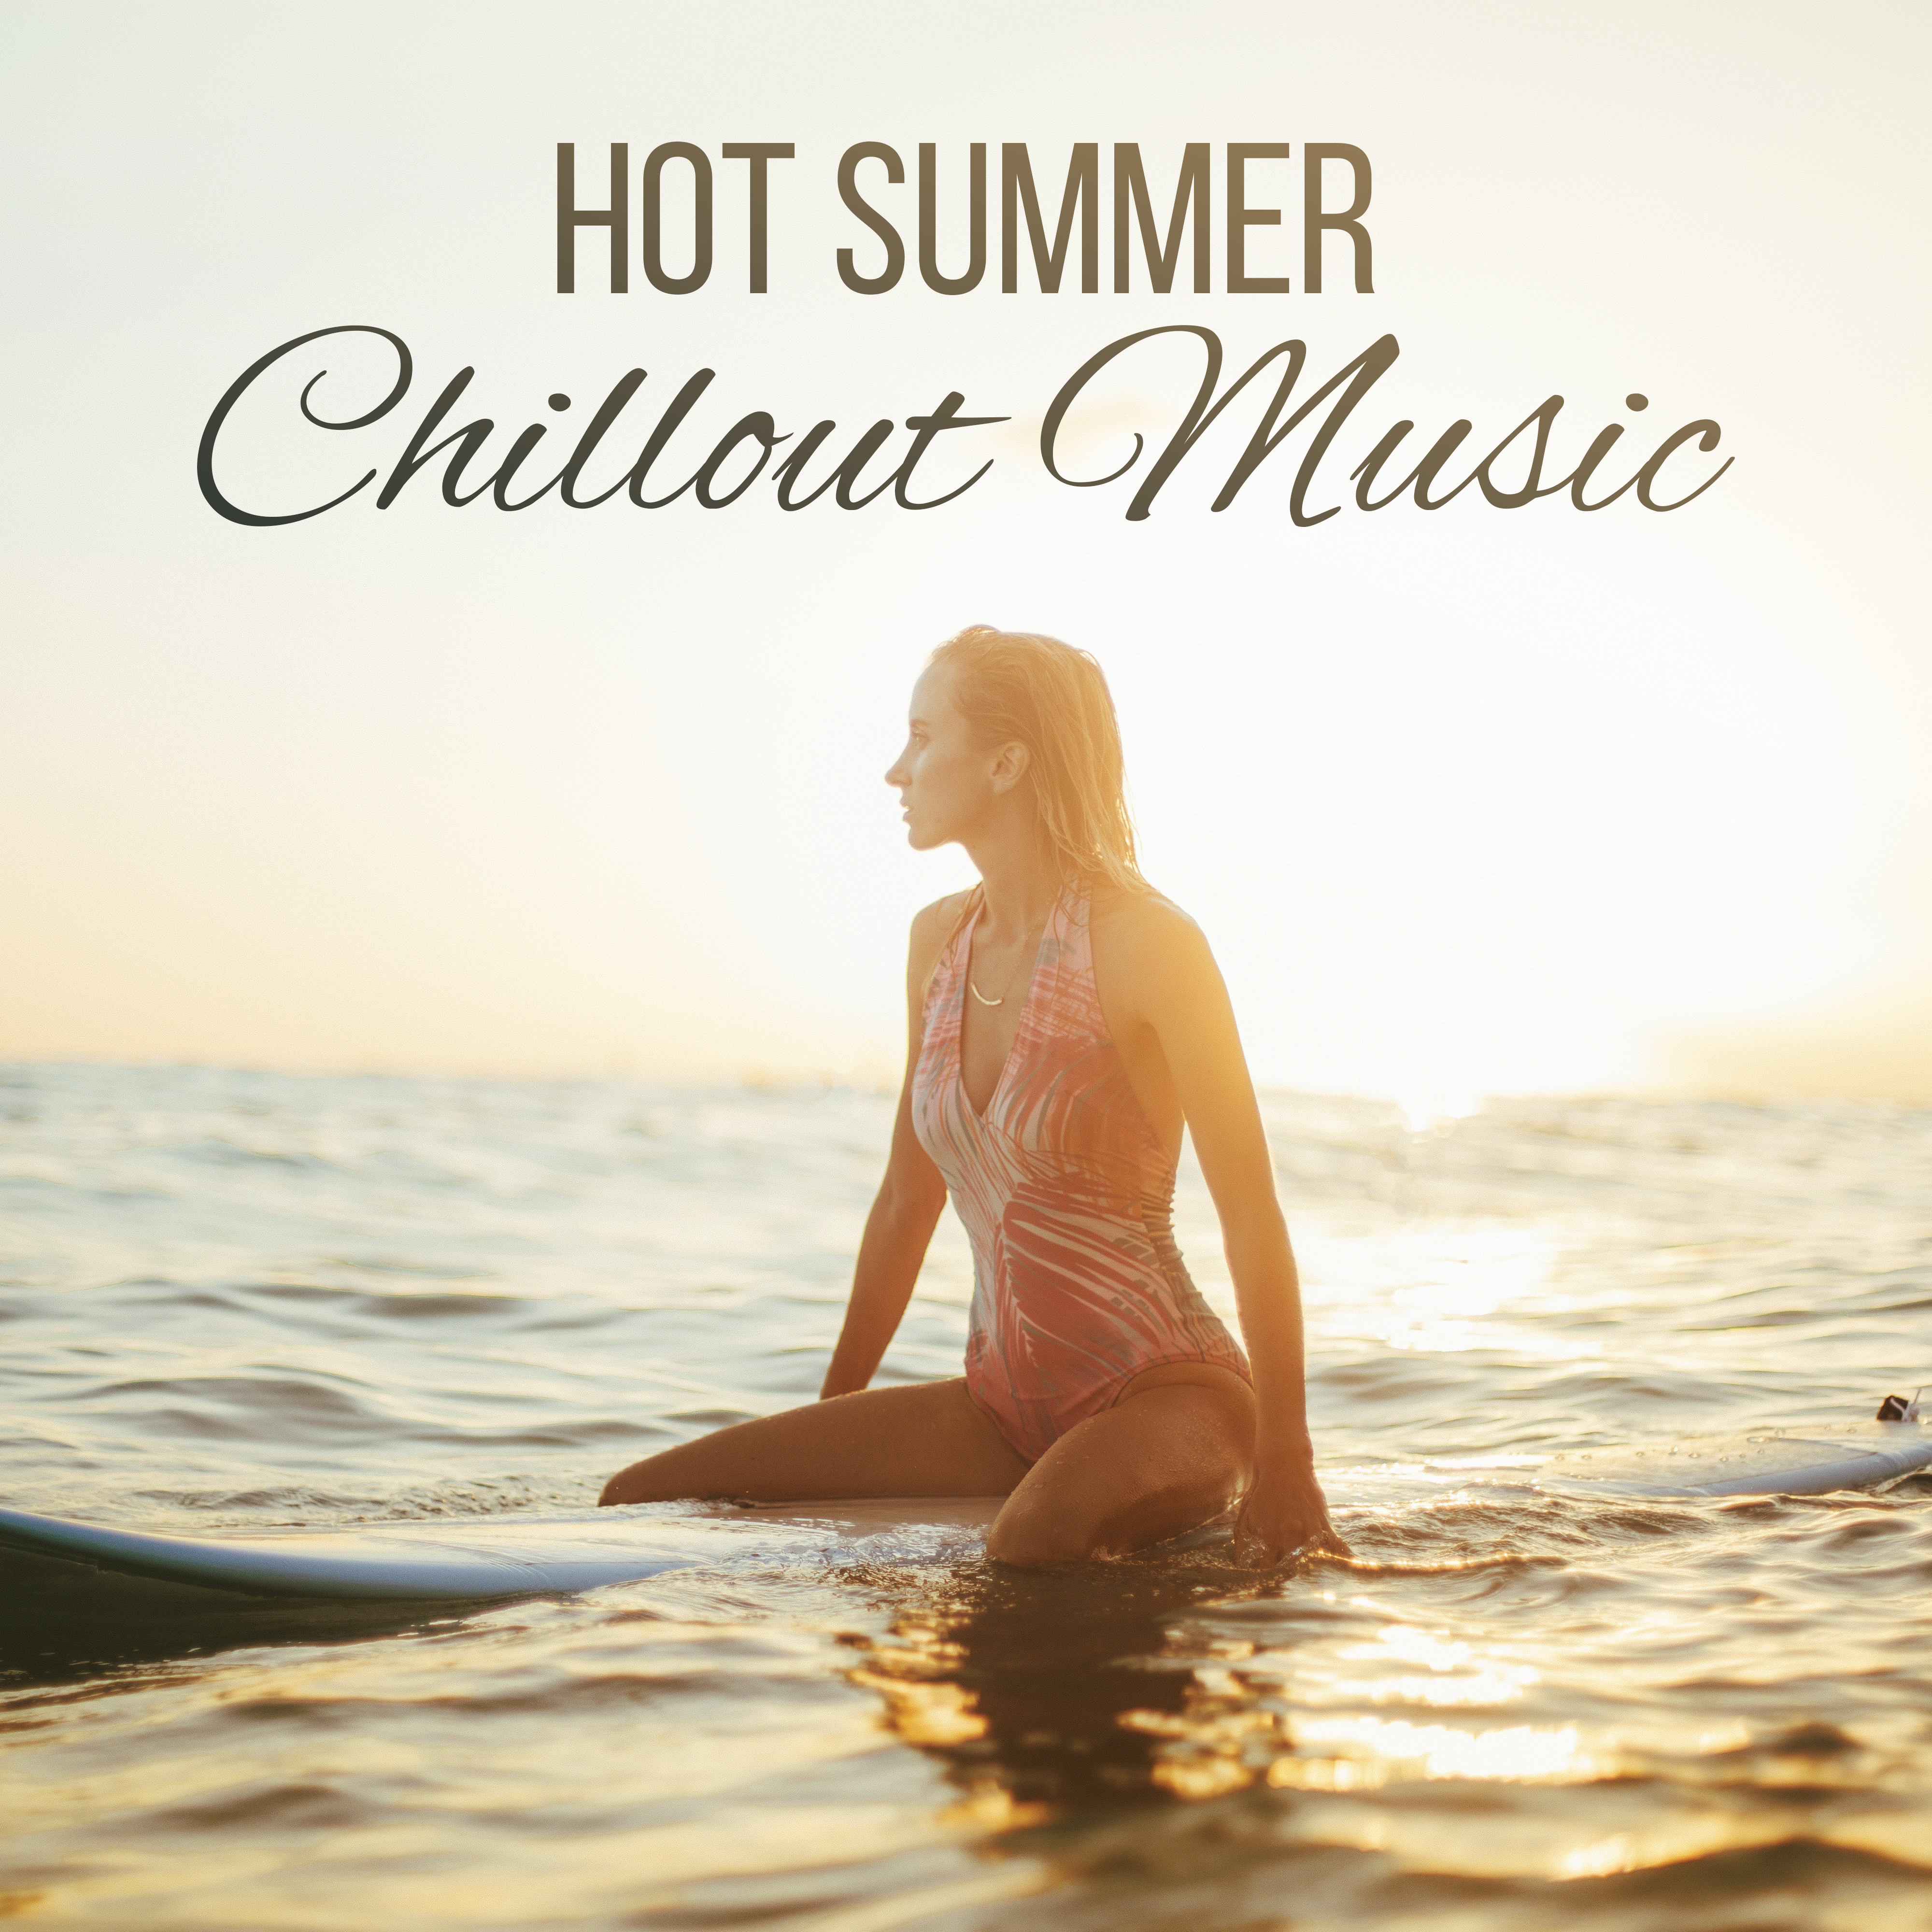 Hot Summer Chillout Music